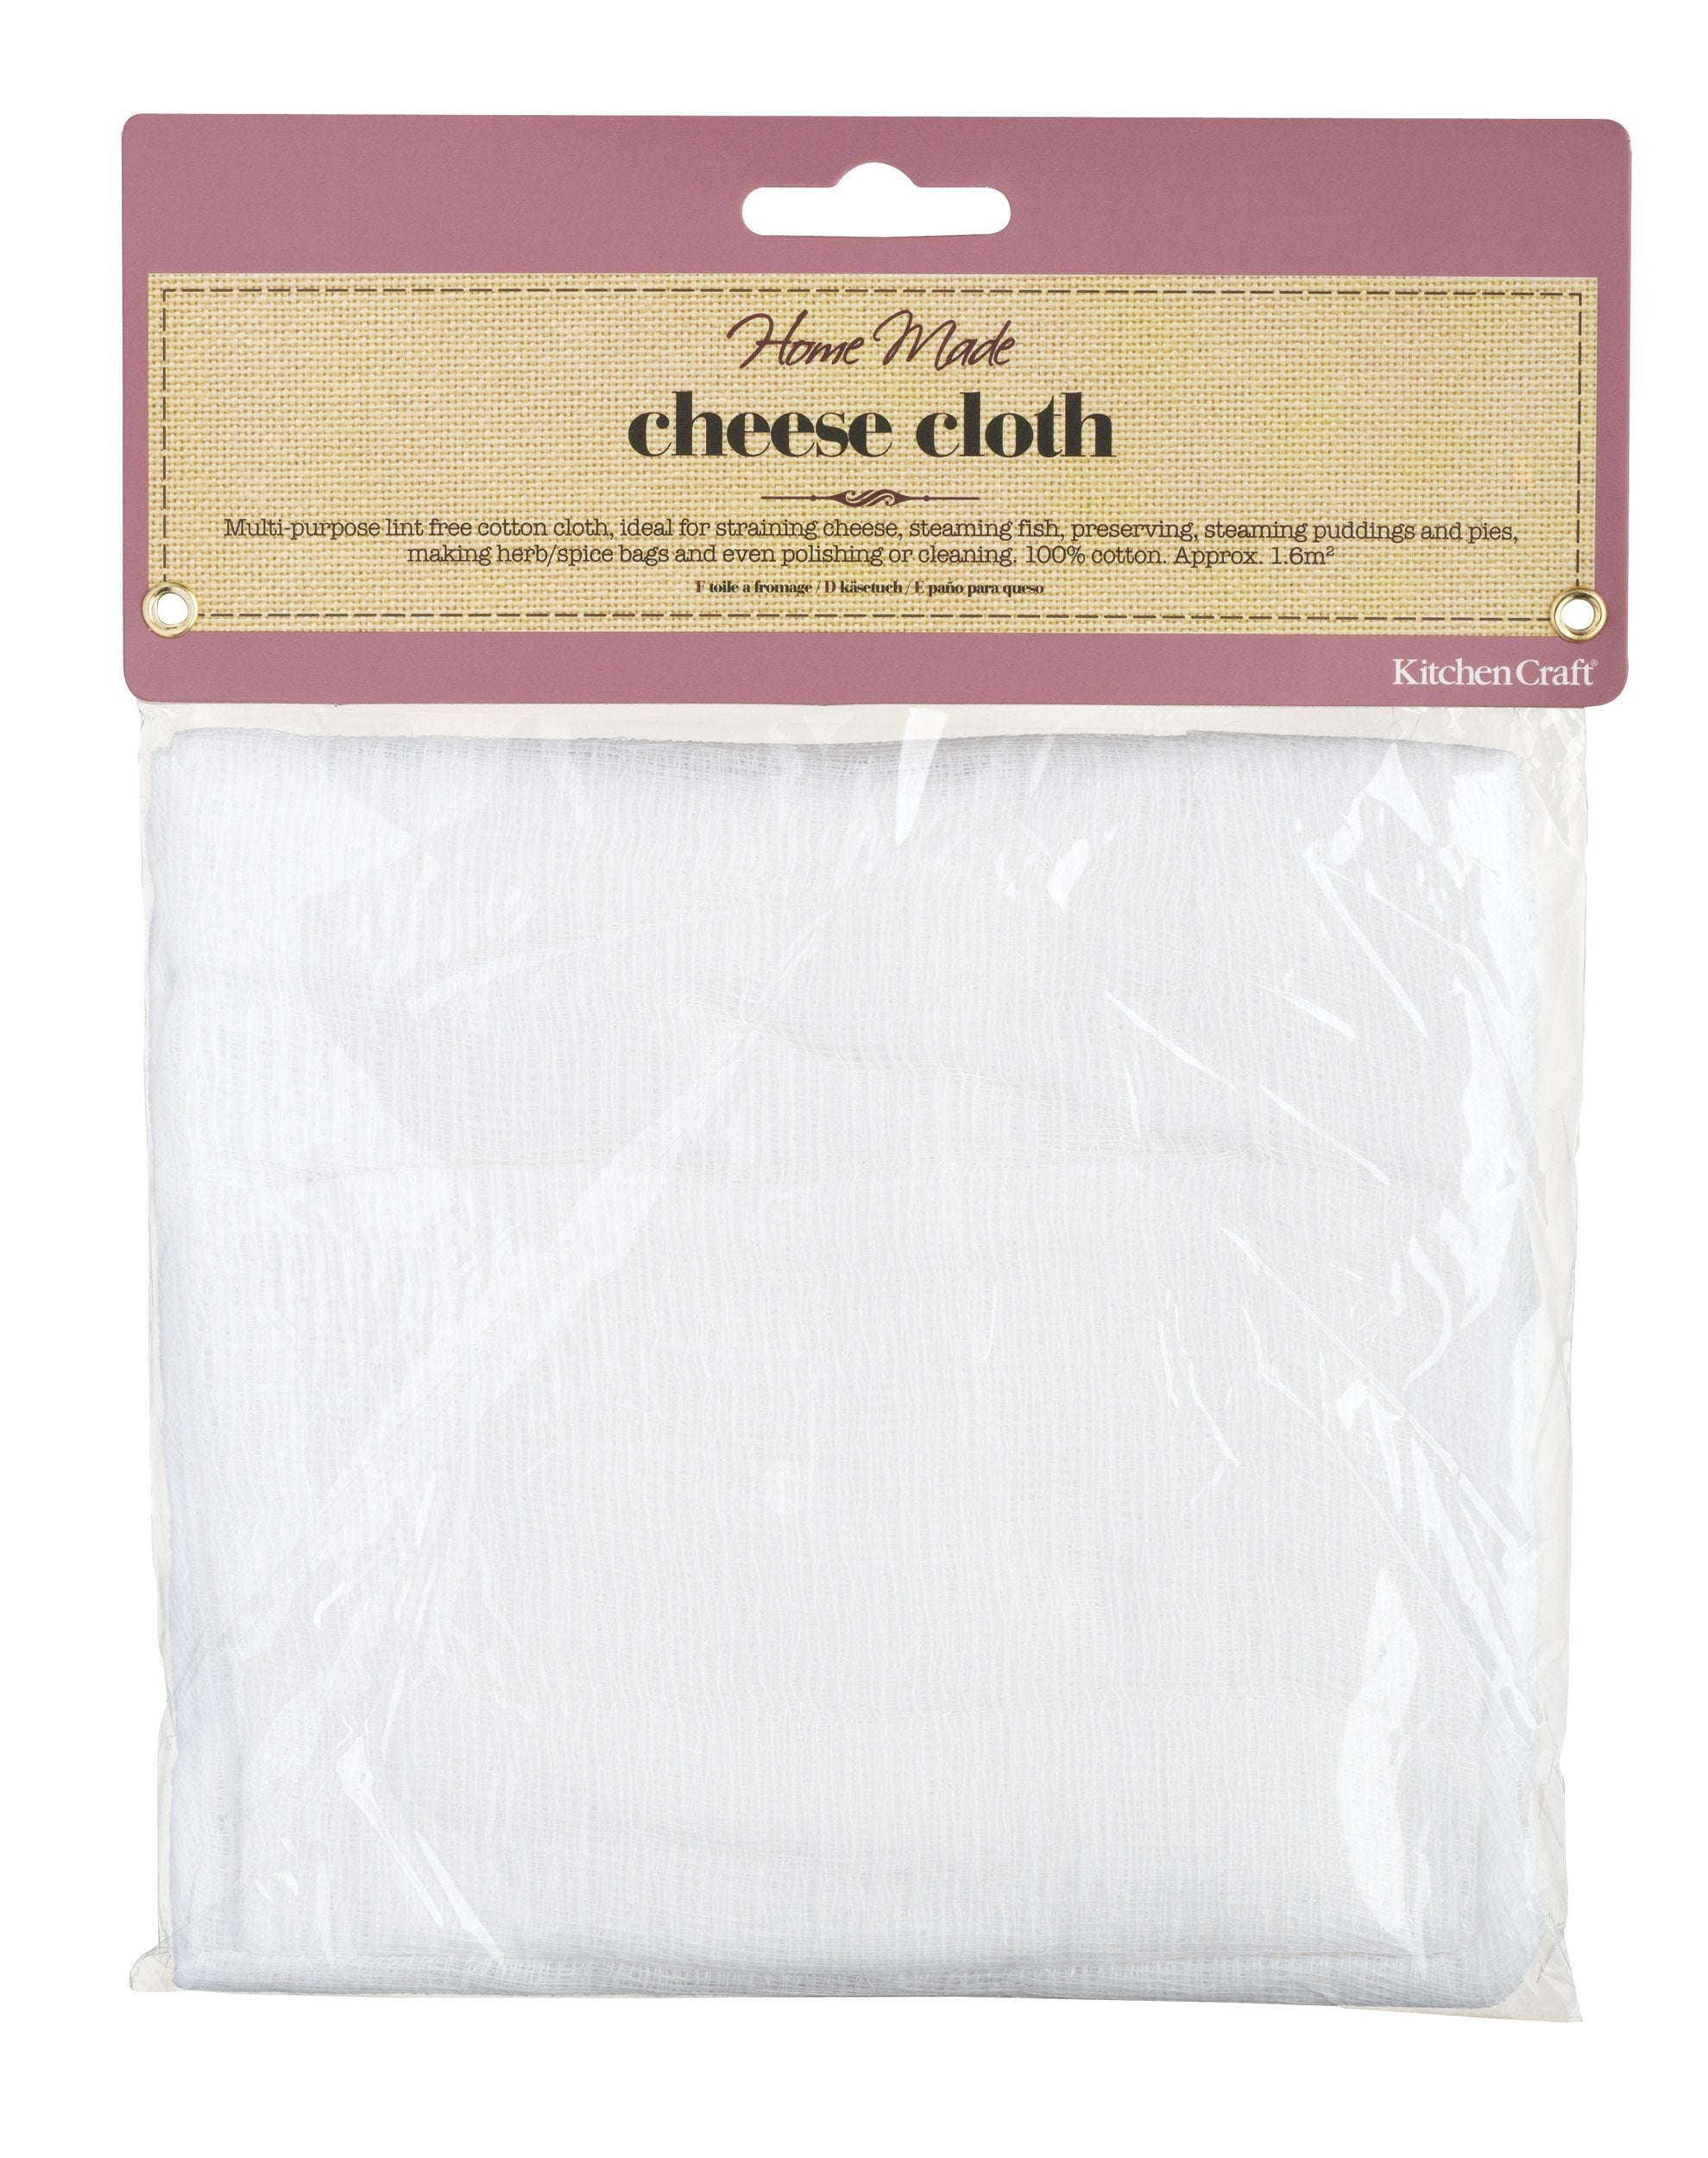 KitchenCraft Home Made Cheesecloth, Cotton, White, 1.6 Metre